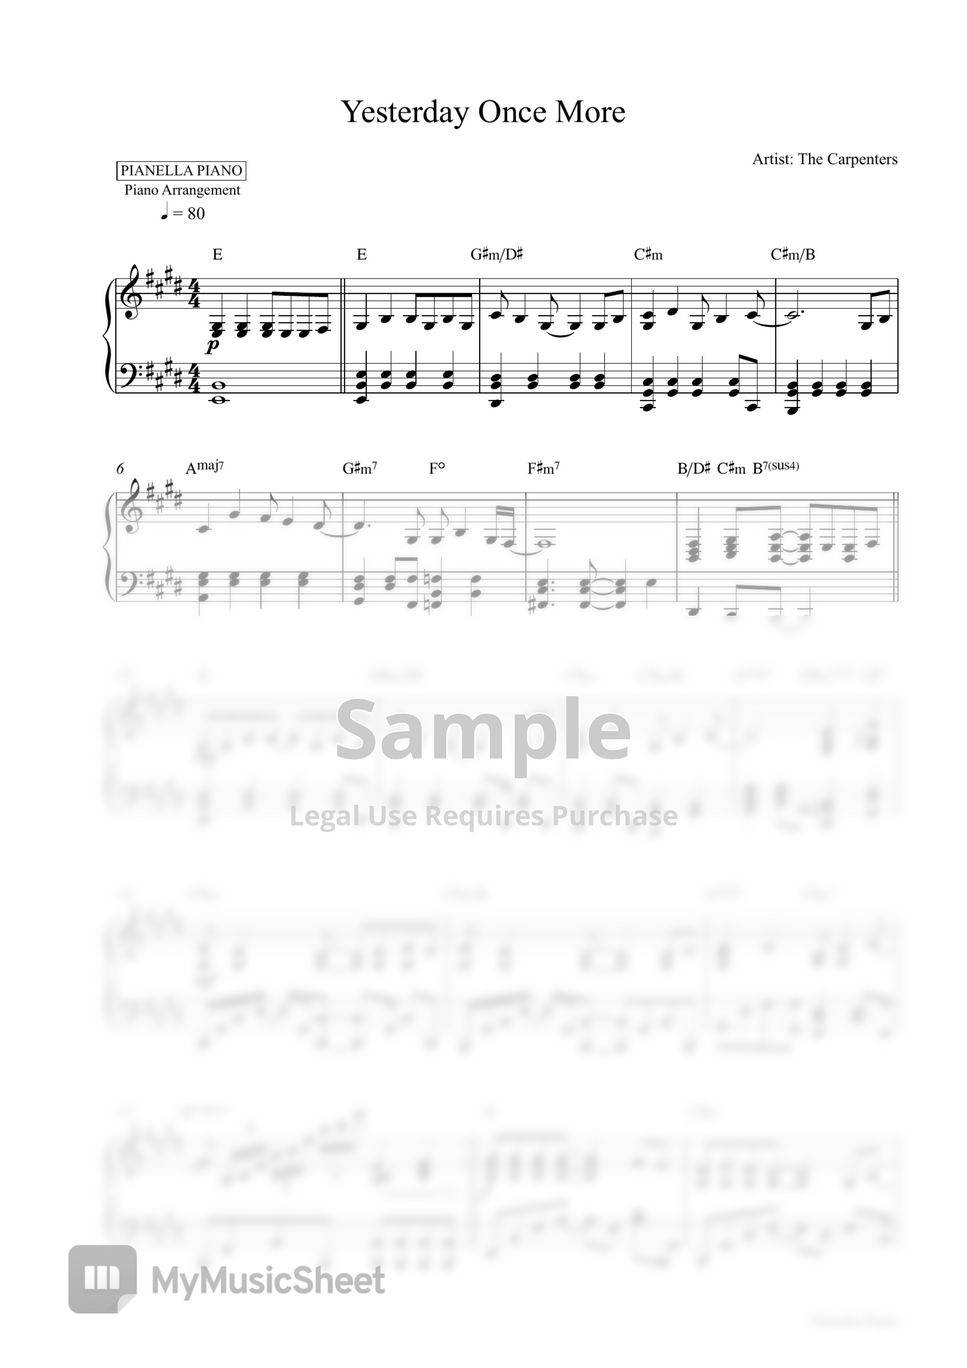 The Carpenters - Yesterday Once More (Piano Sheet) by Pianella Piano